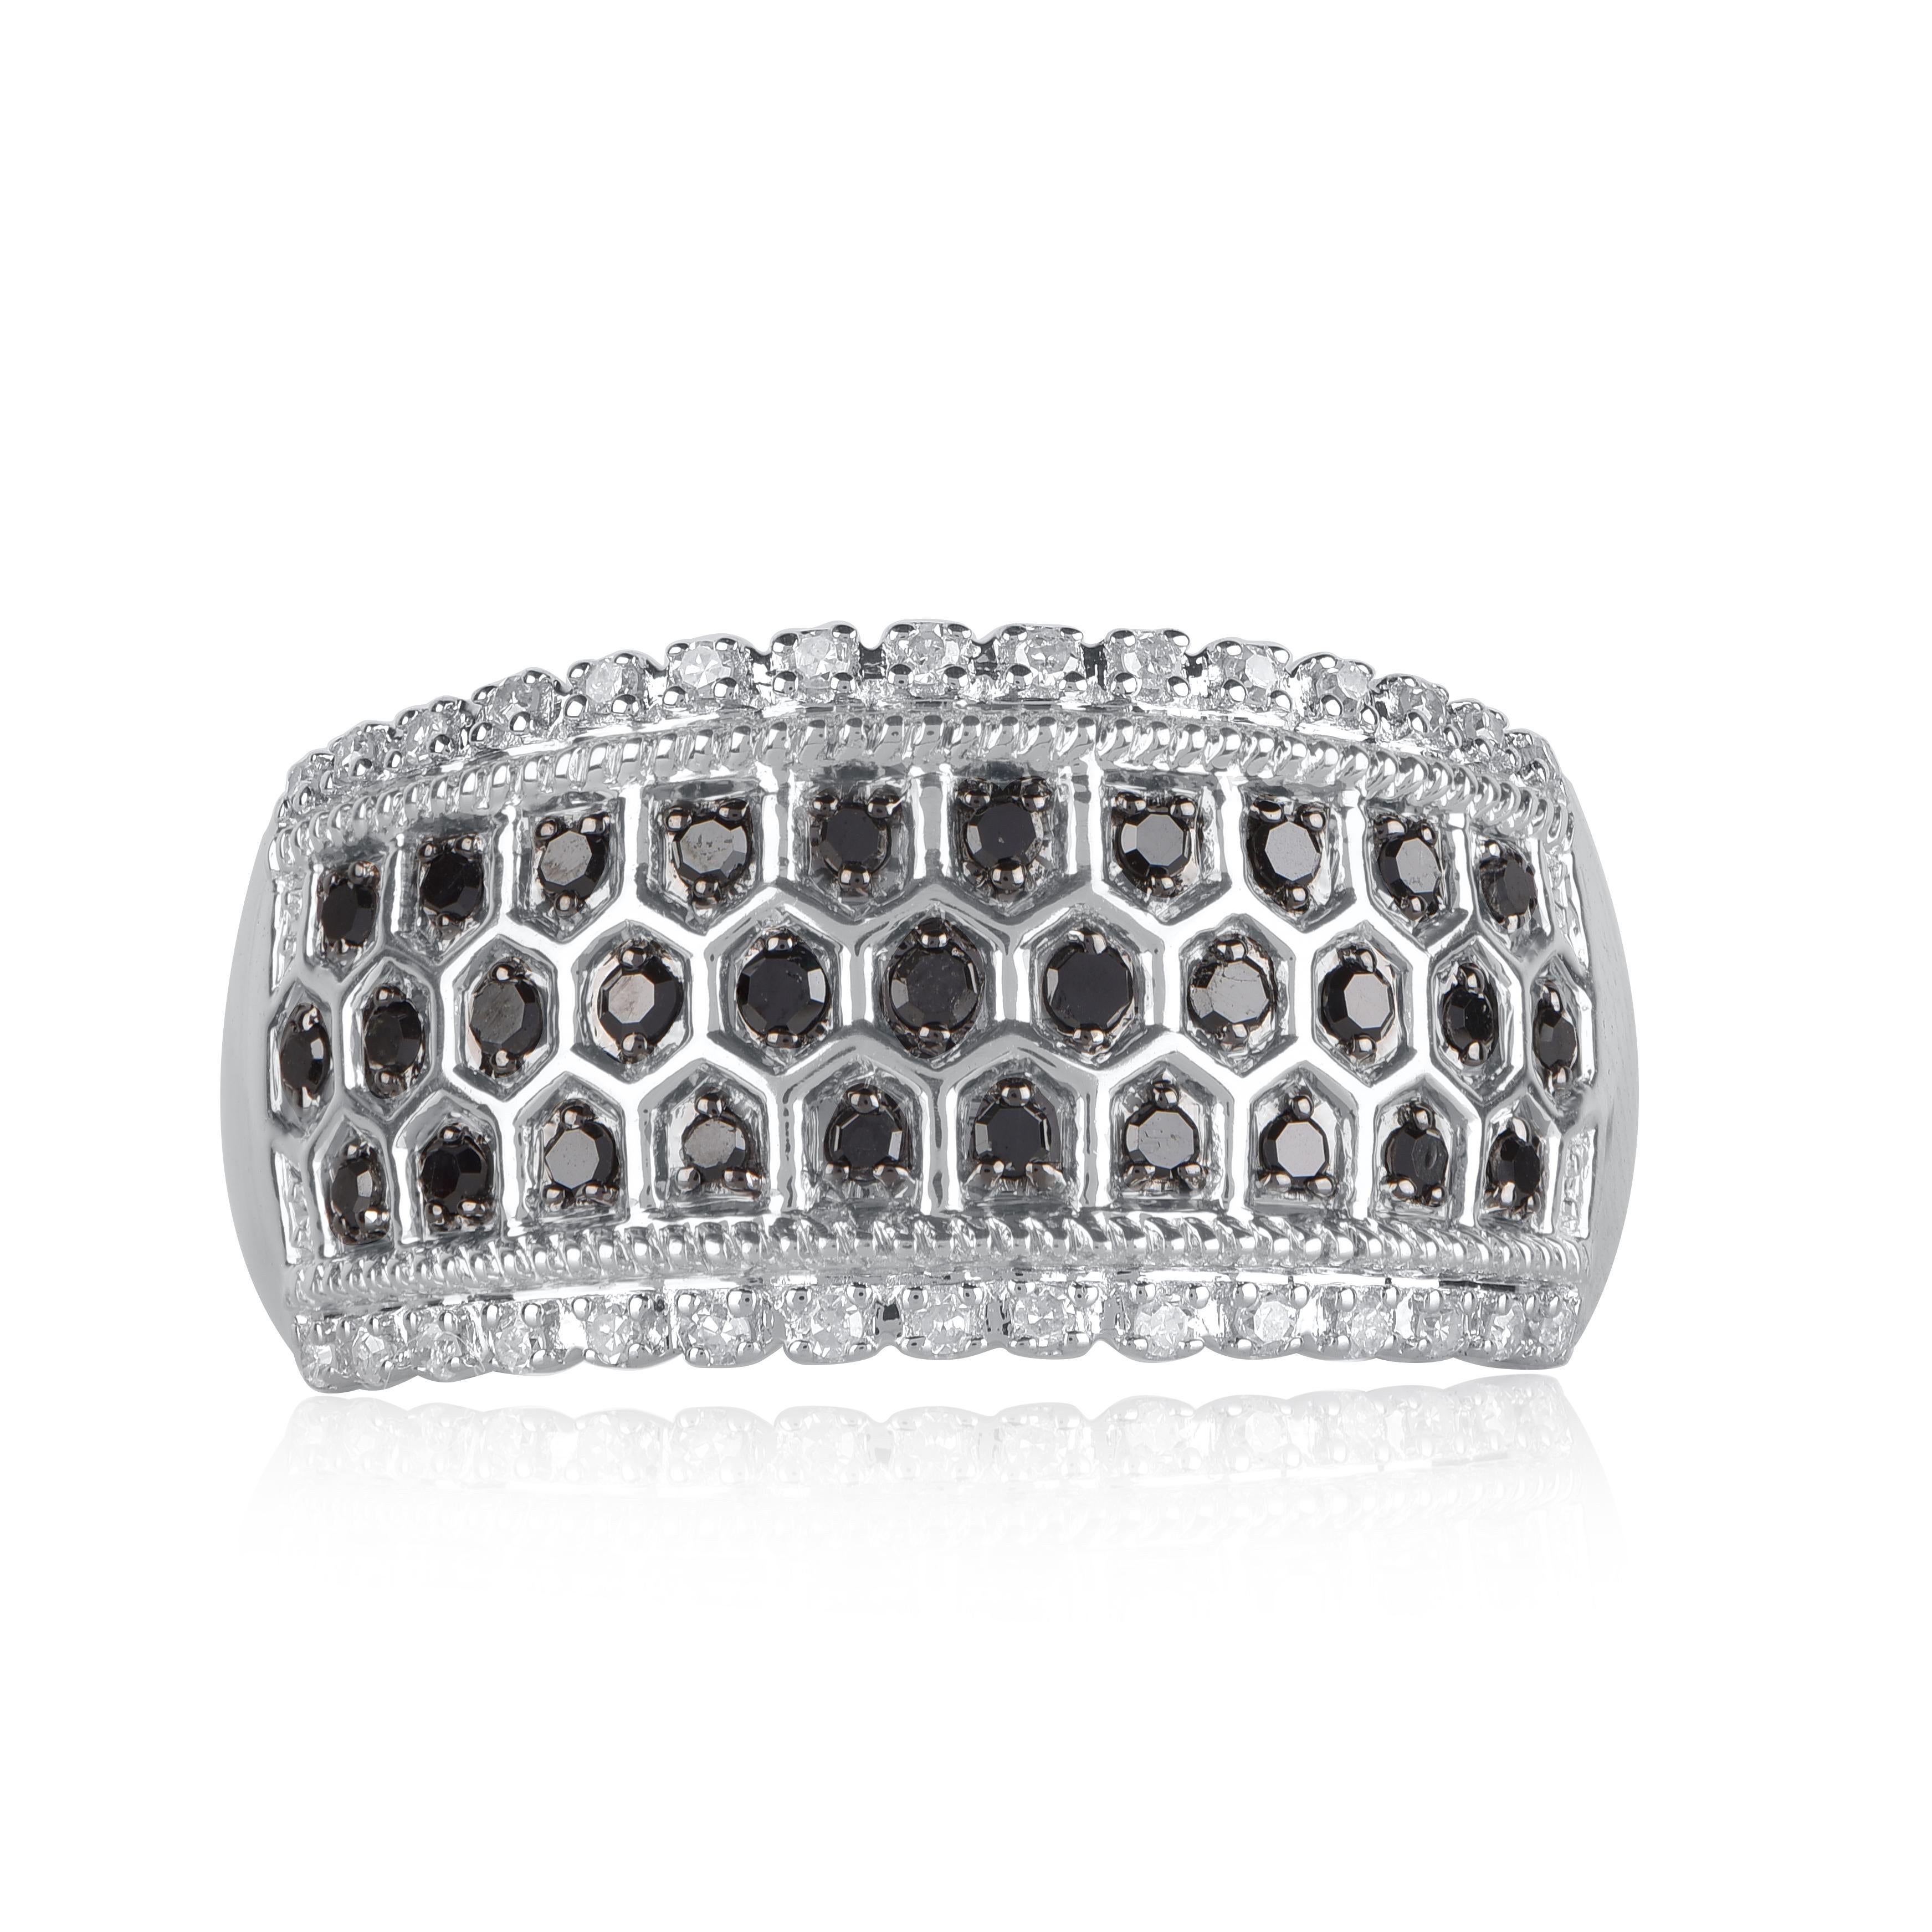 This ring make any day a little more glamorous! These ring is crafted in 14KT white gold, and studded with 61 single cut and black treated natural diamonds in pave setting. The total diamond weight of these diamond ring is 0.33 carats. The diamonds